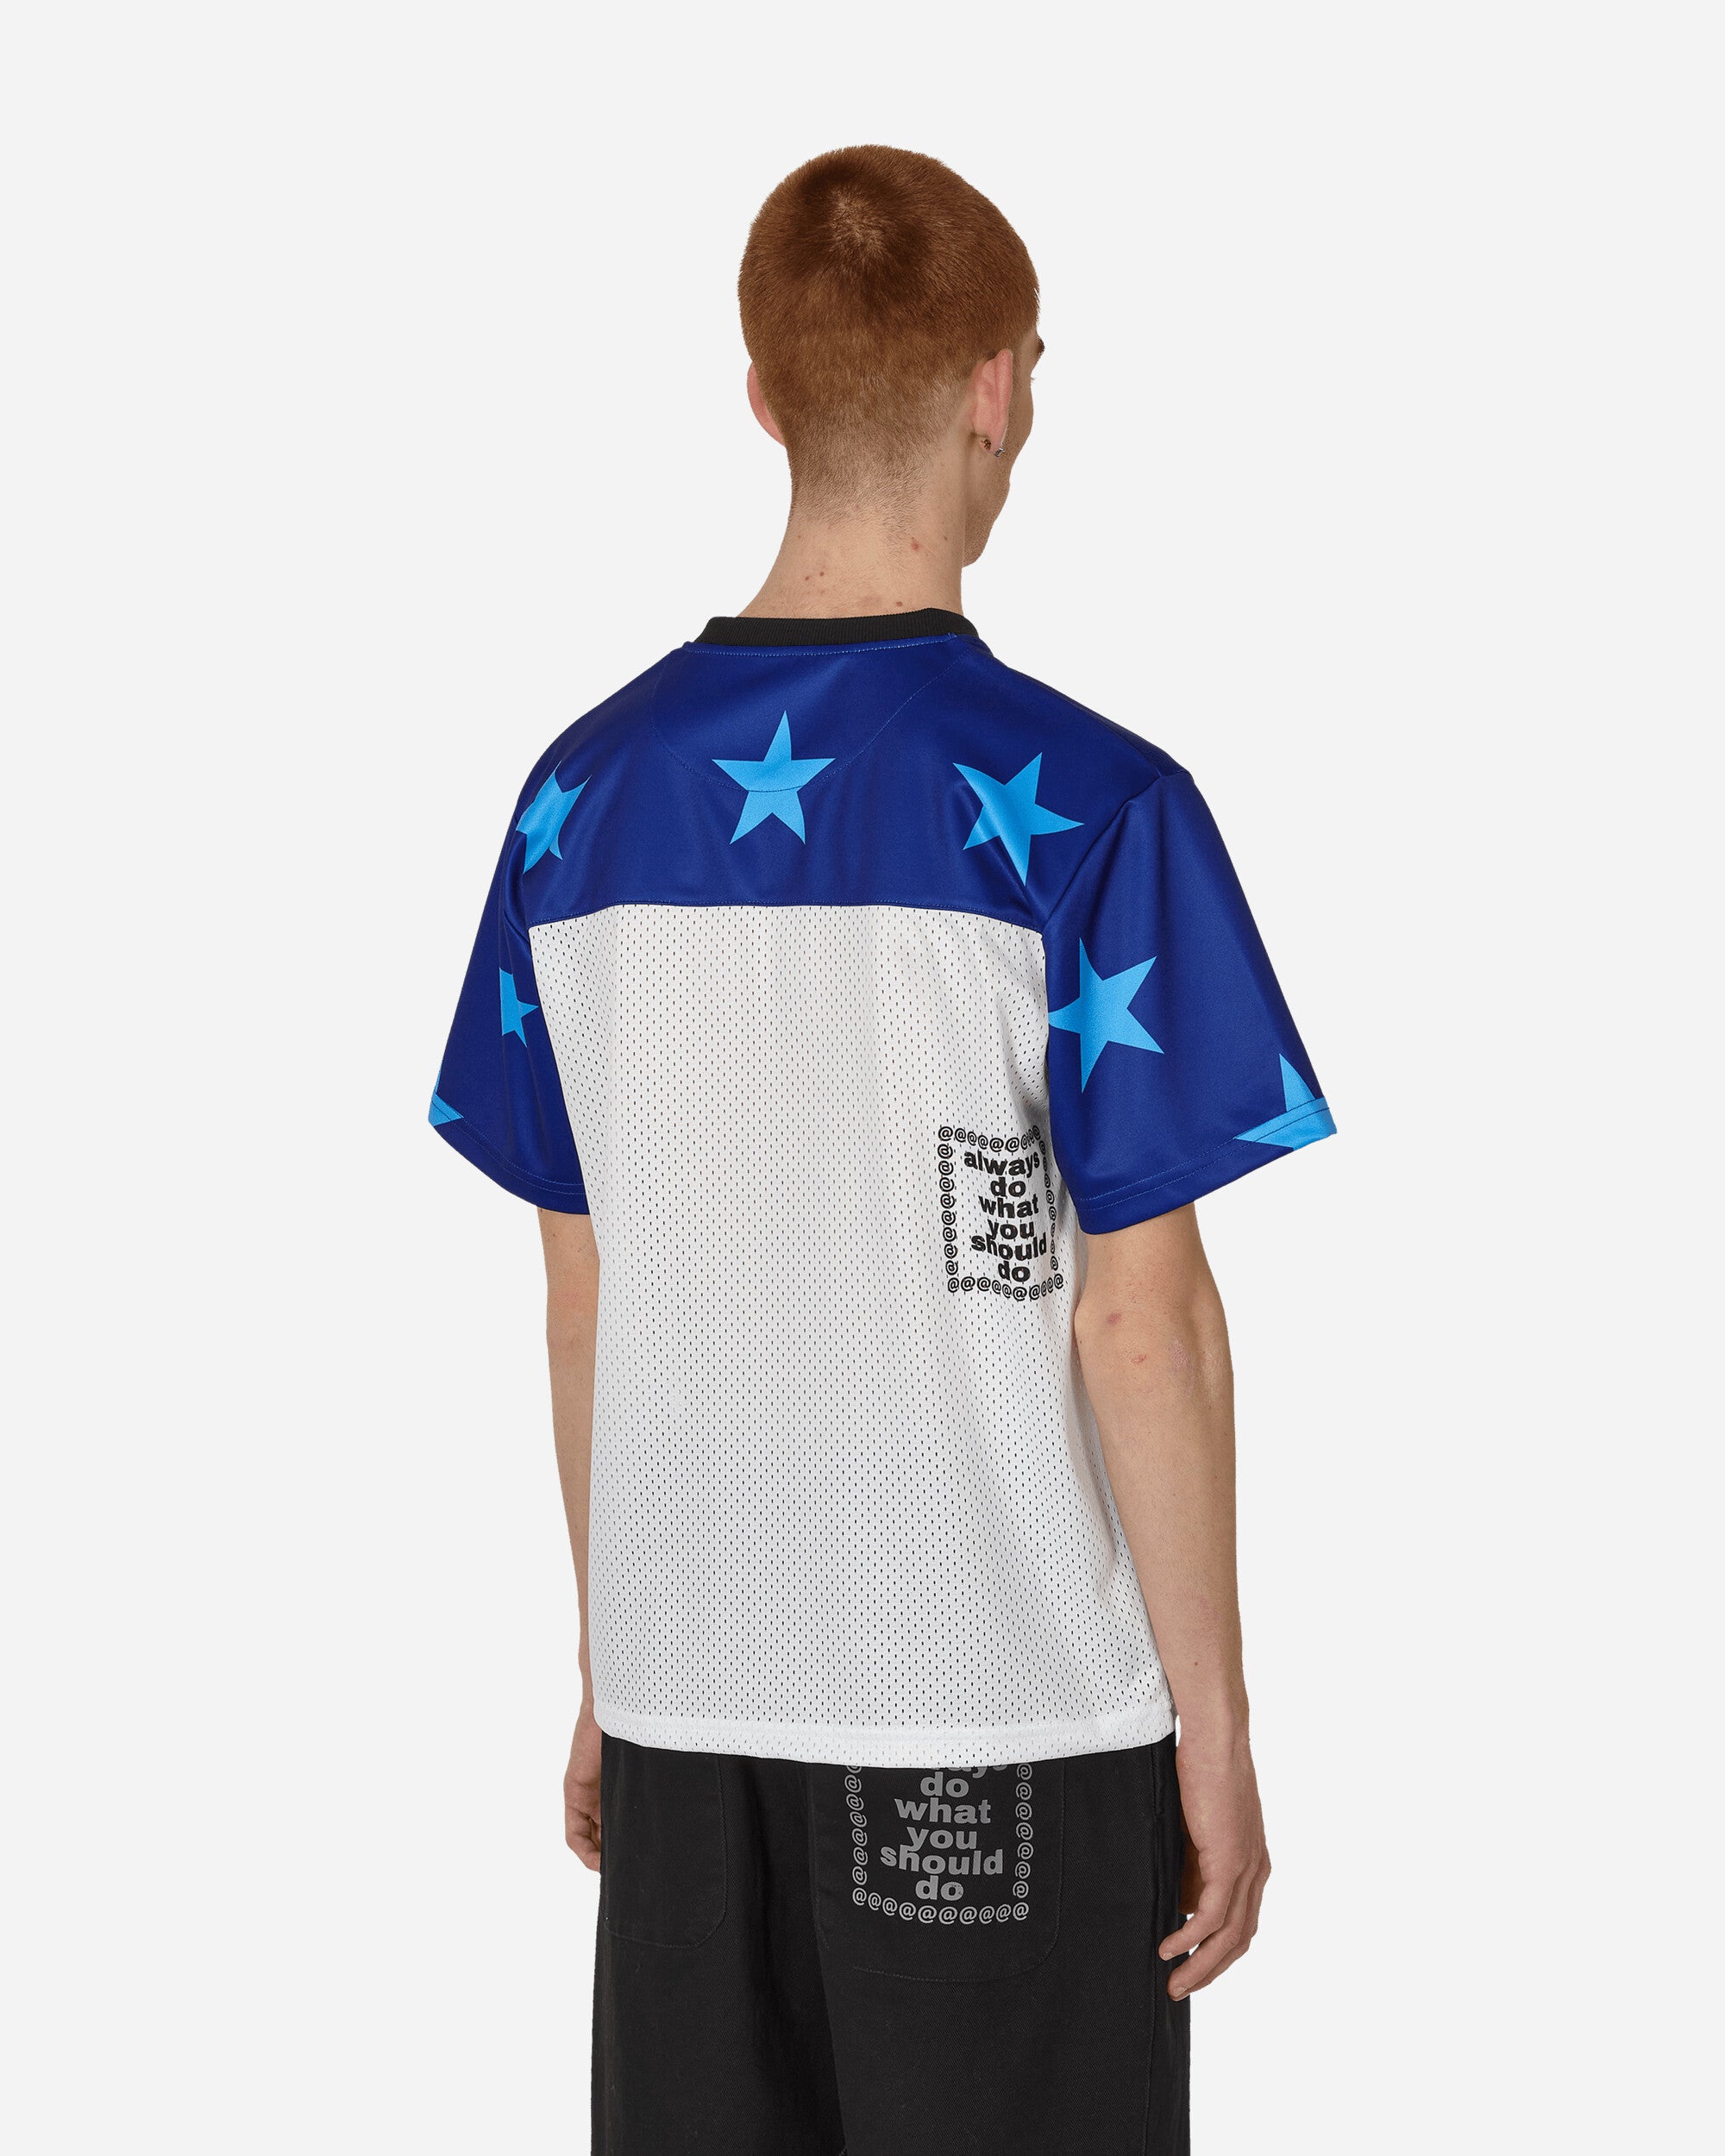 Always Do What You Should Do Micro Mesh Star Football Jersey Blue-Navy T-Shirts Shortsleeve STARJERSEY BLUE-NAVY